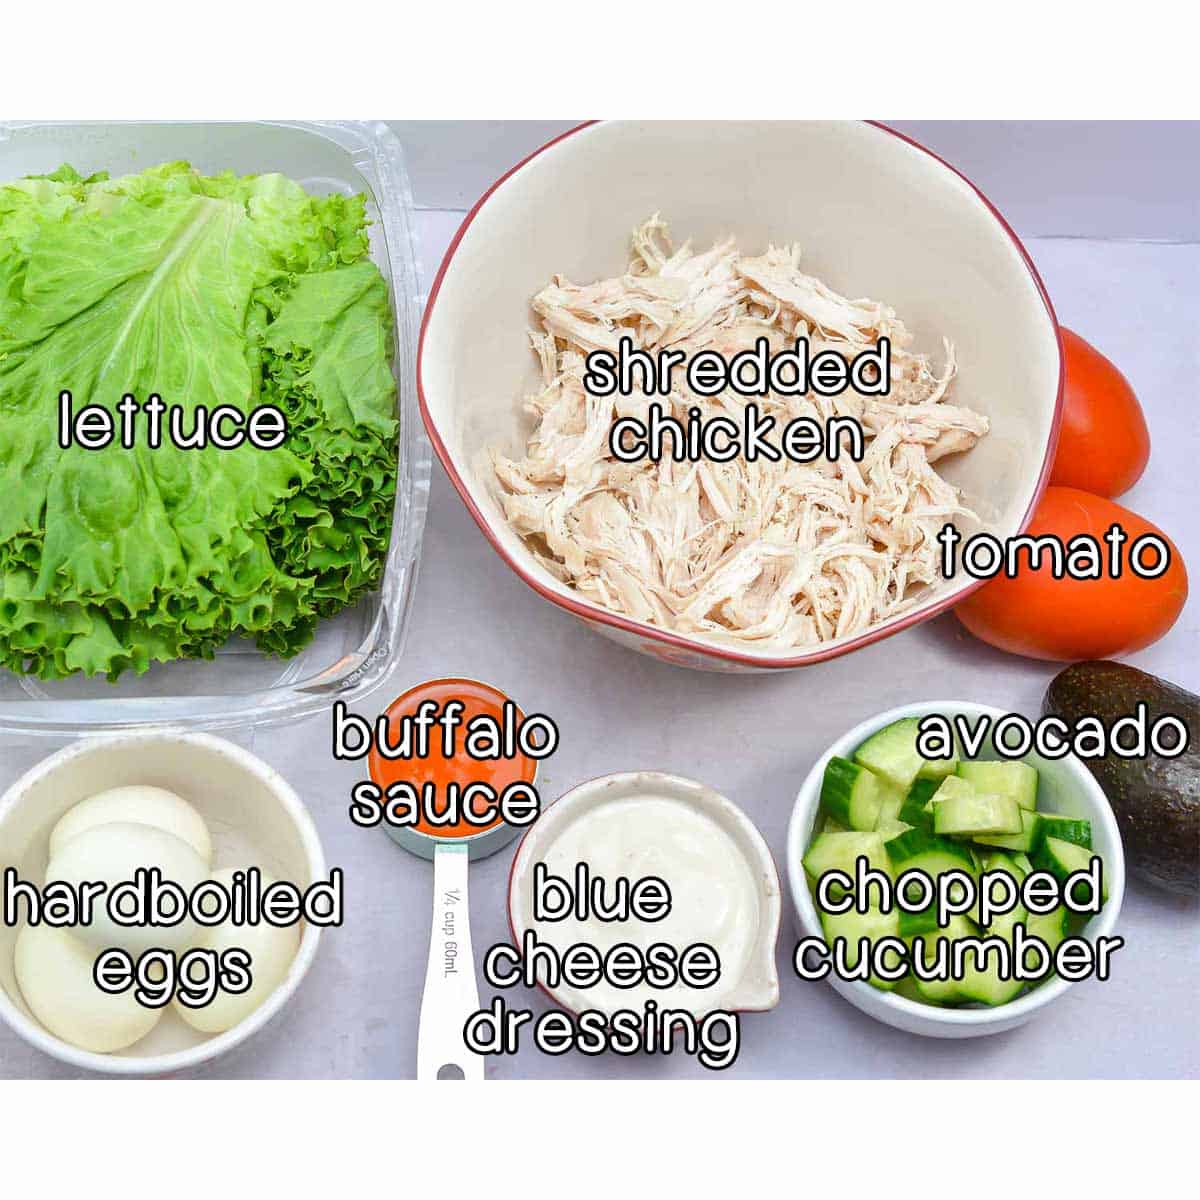 Overhead shot of ingredients- lettuce, shredded chicken, tomato, avocado, chopped cucumber, blue cheese dressing, buffalo sauce, and hardboiled eggs.